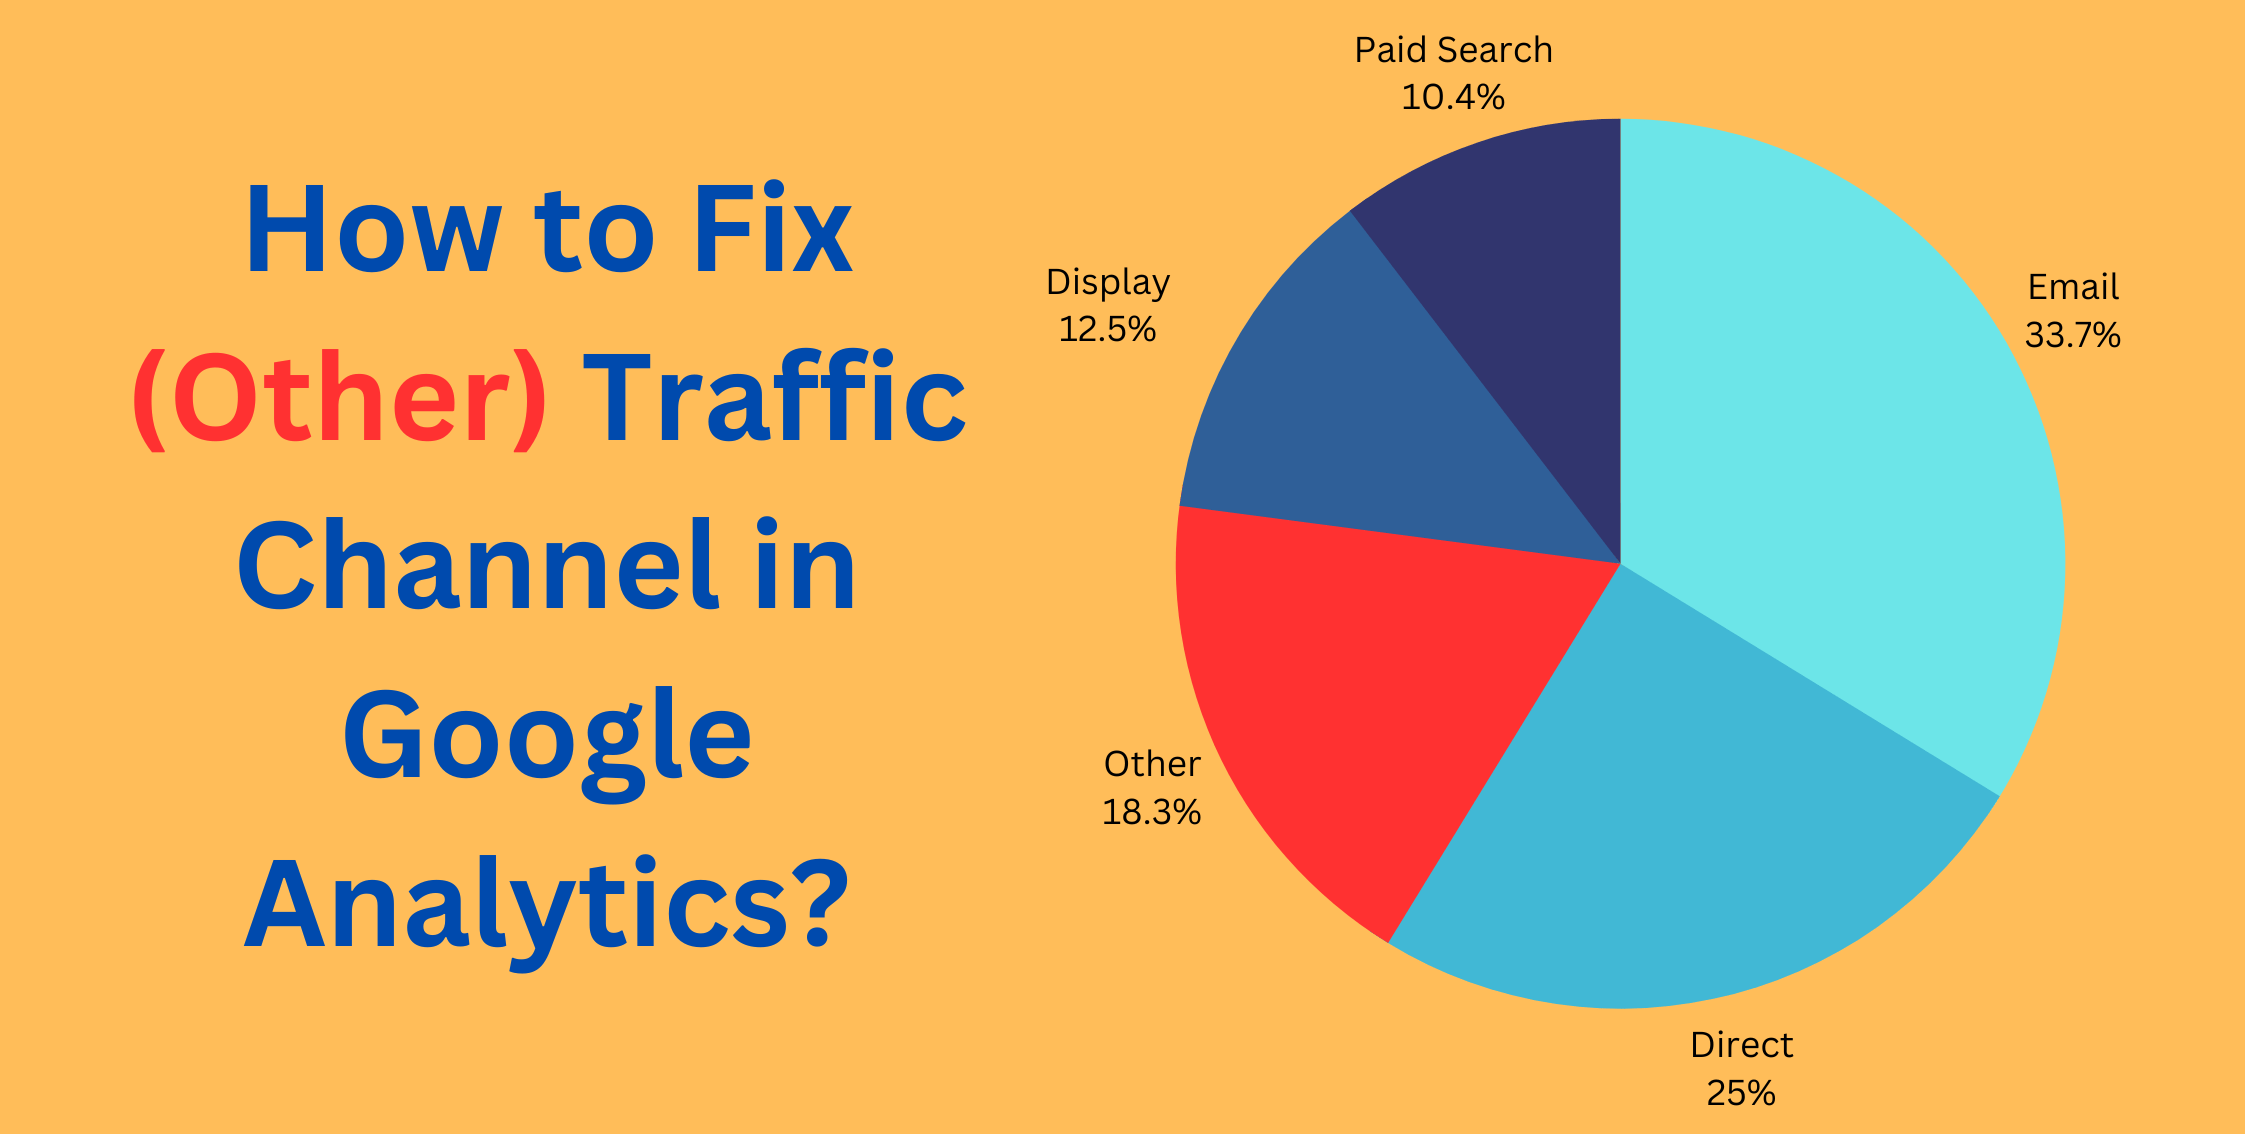 How to Fix (Other) Traffic Channel in Google Analytics?